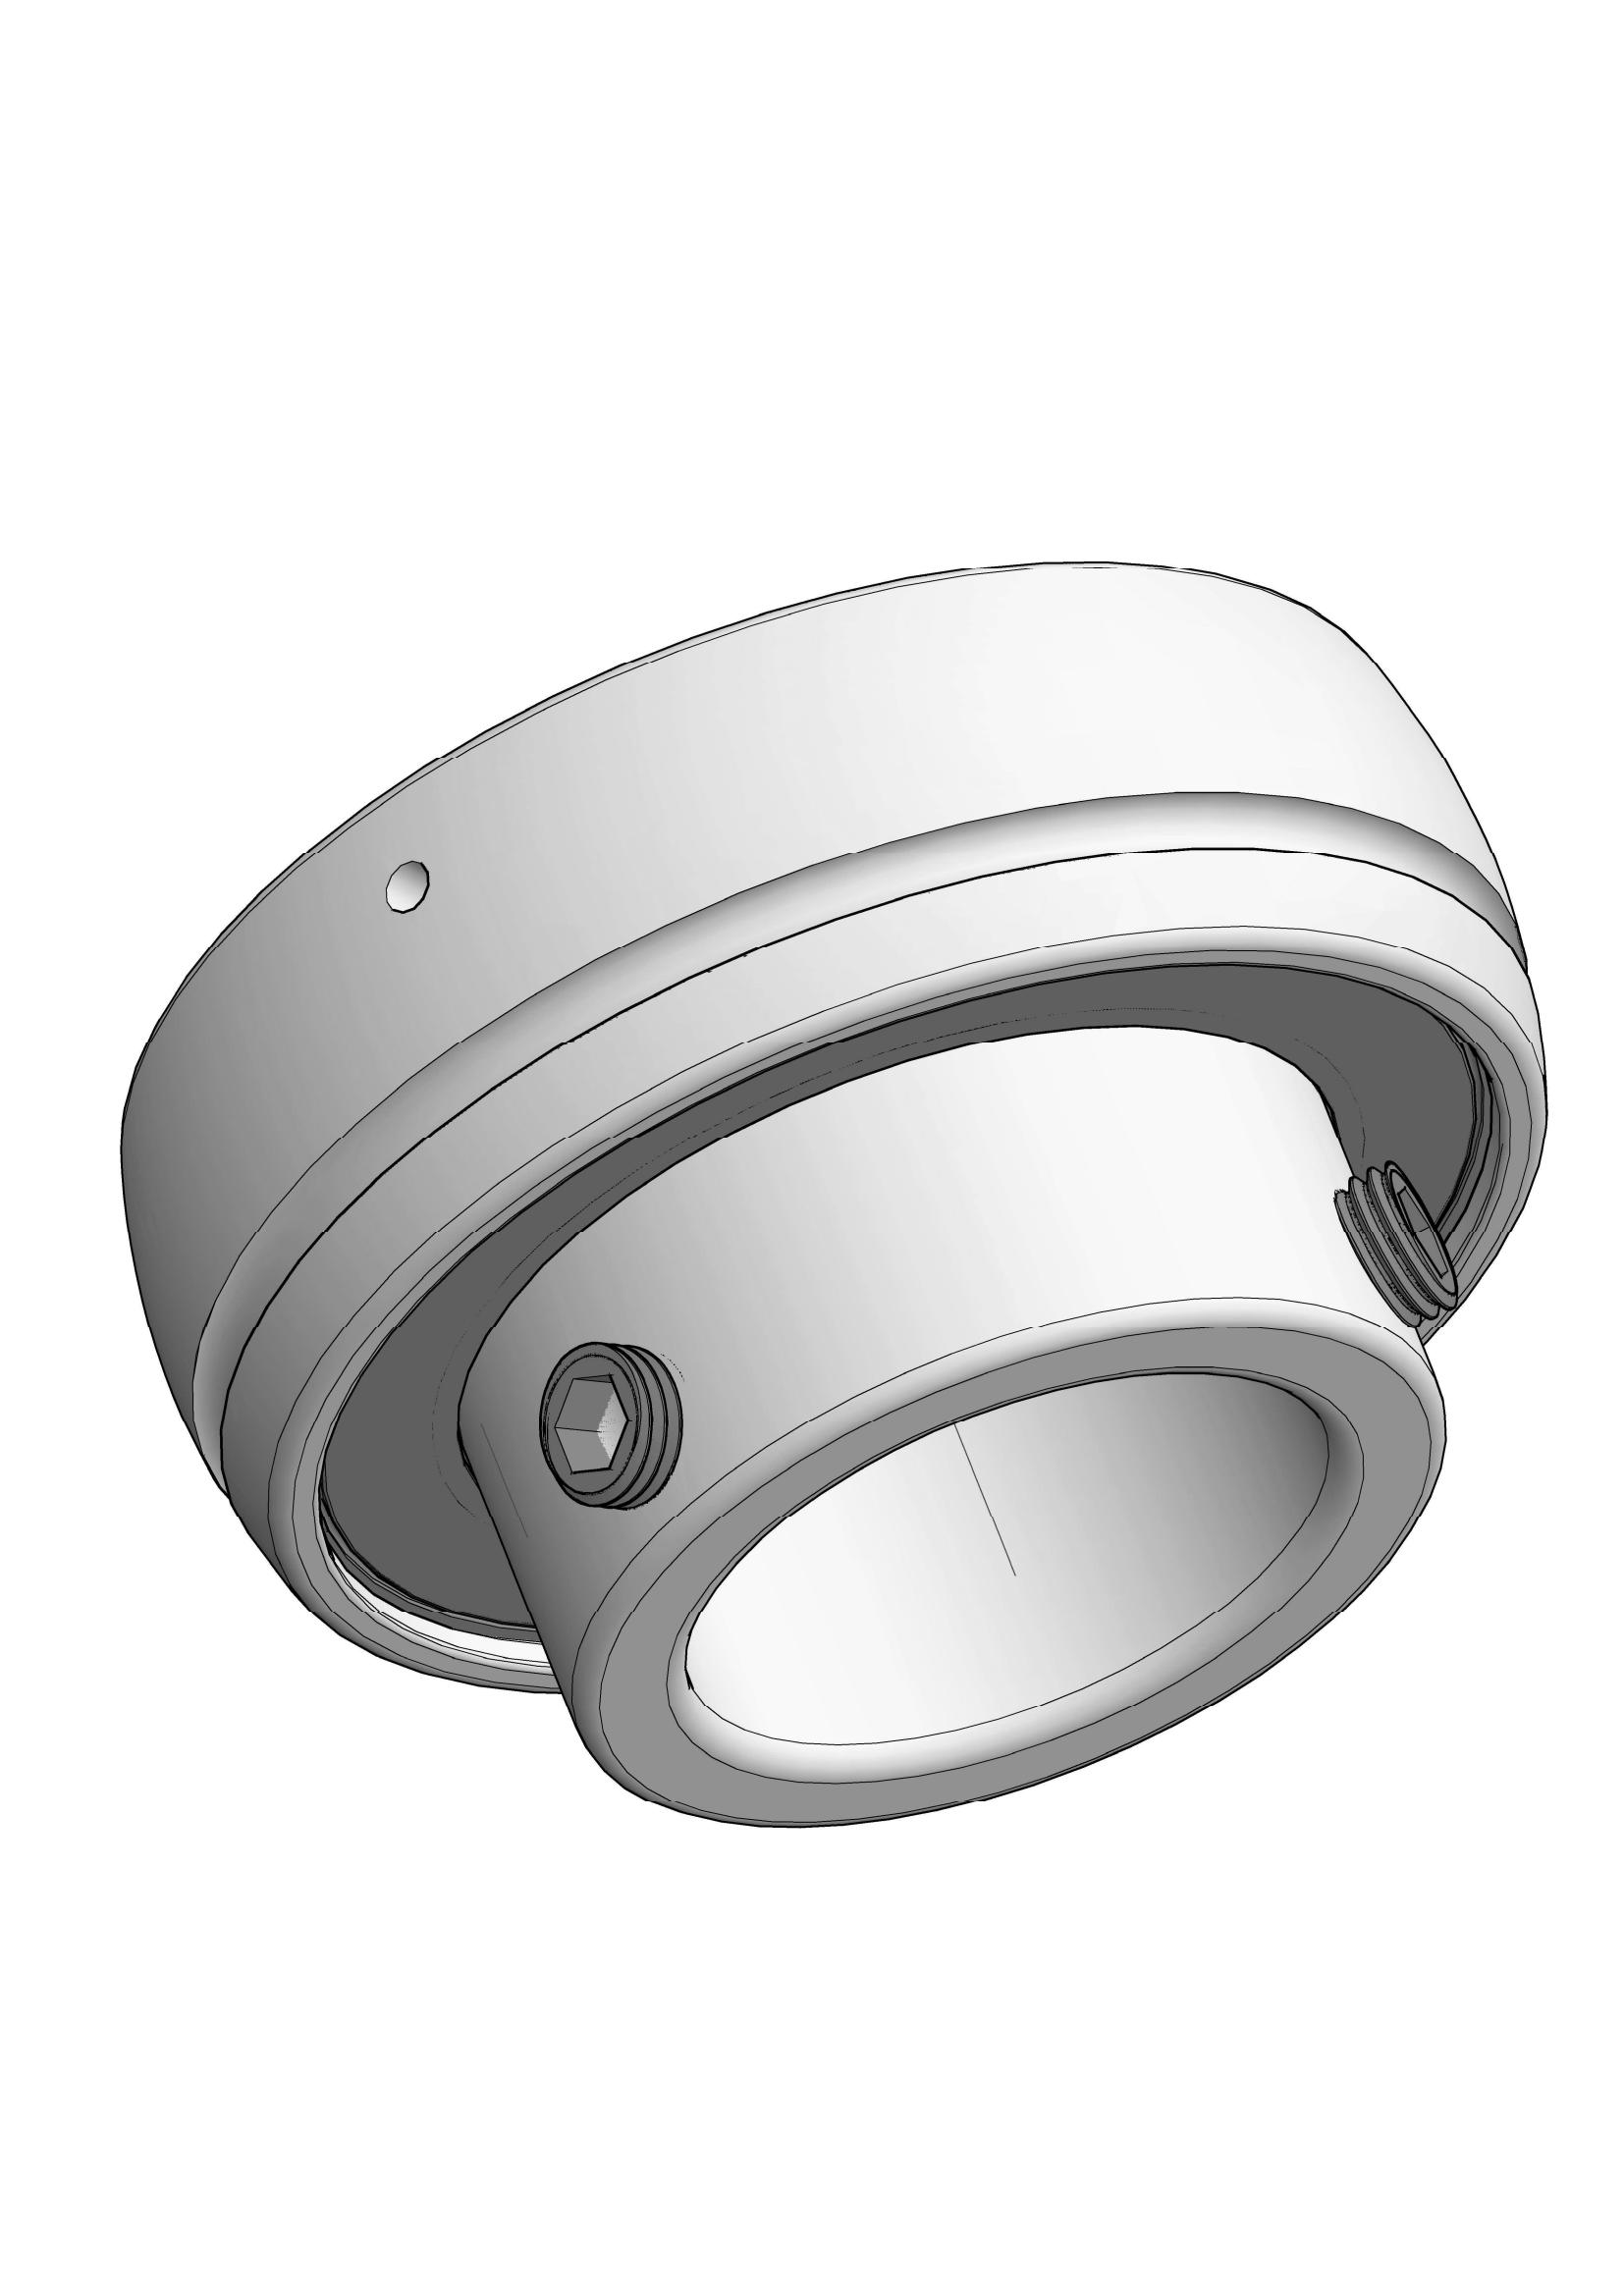 SB203 insert ball bearings with Eccentric Collar Lock with 17mm Bore